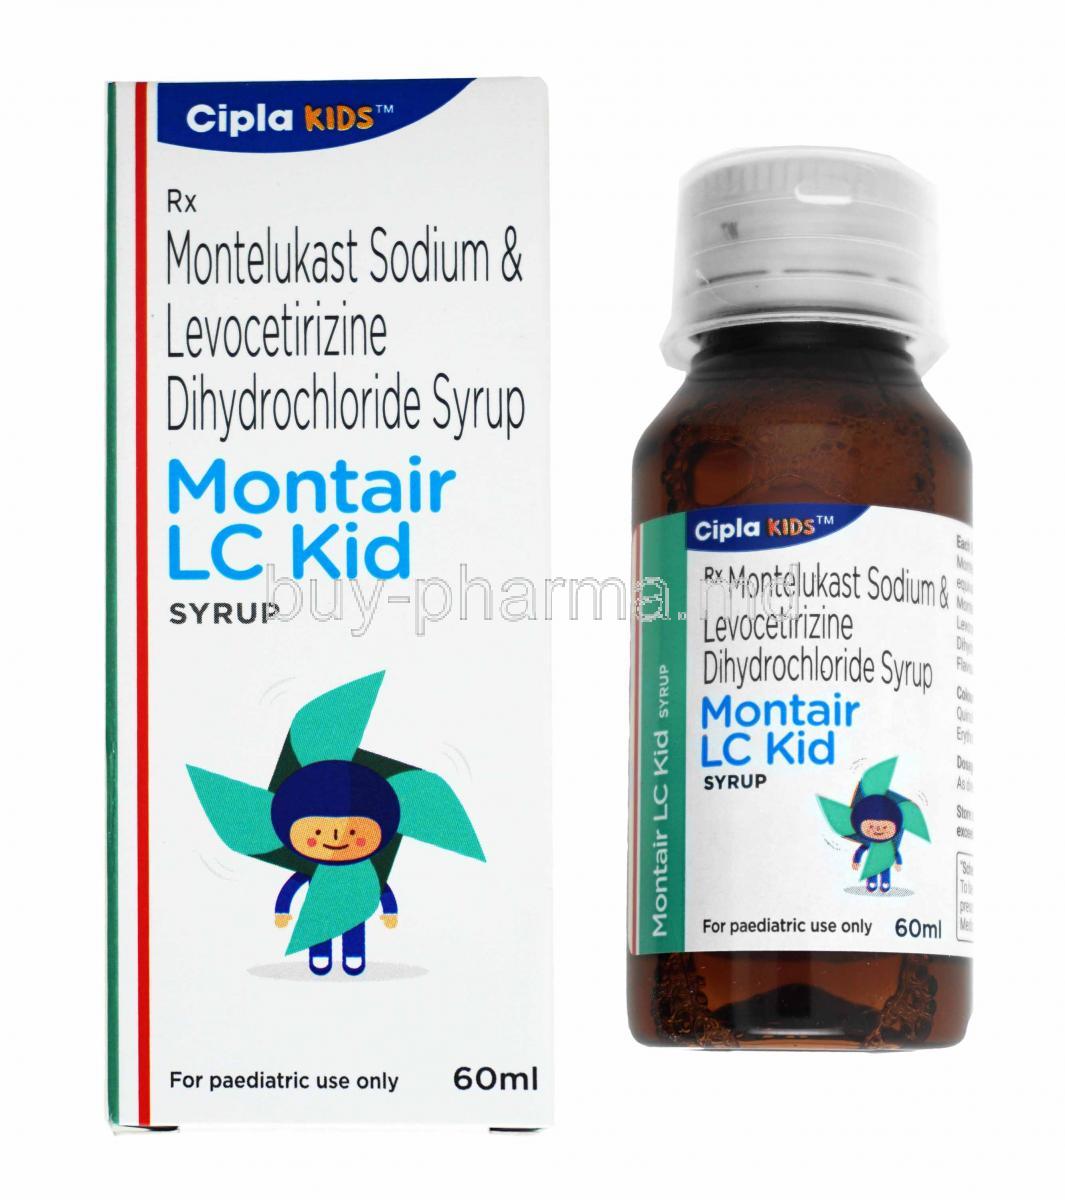 Montair LC Kid Syrup, Levocetirizine and Montelukast box and bottle